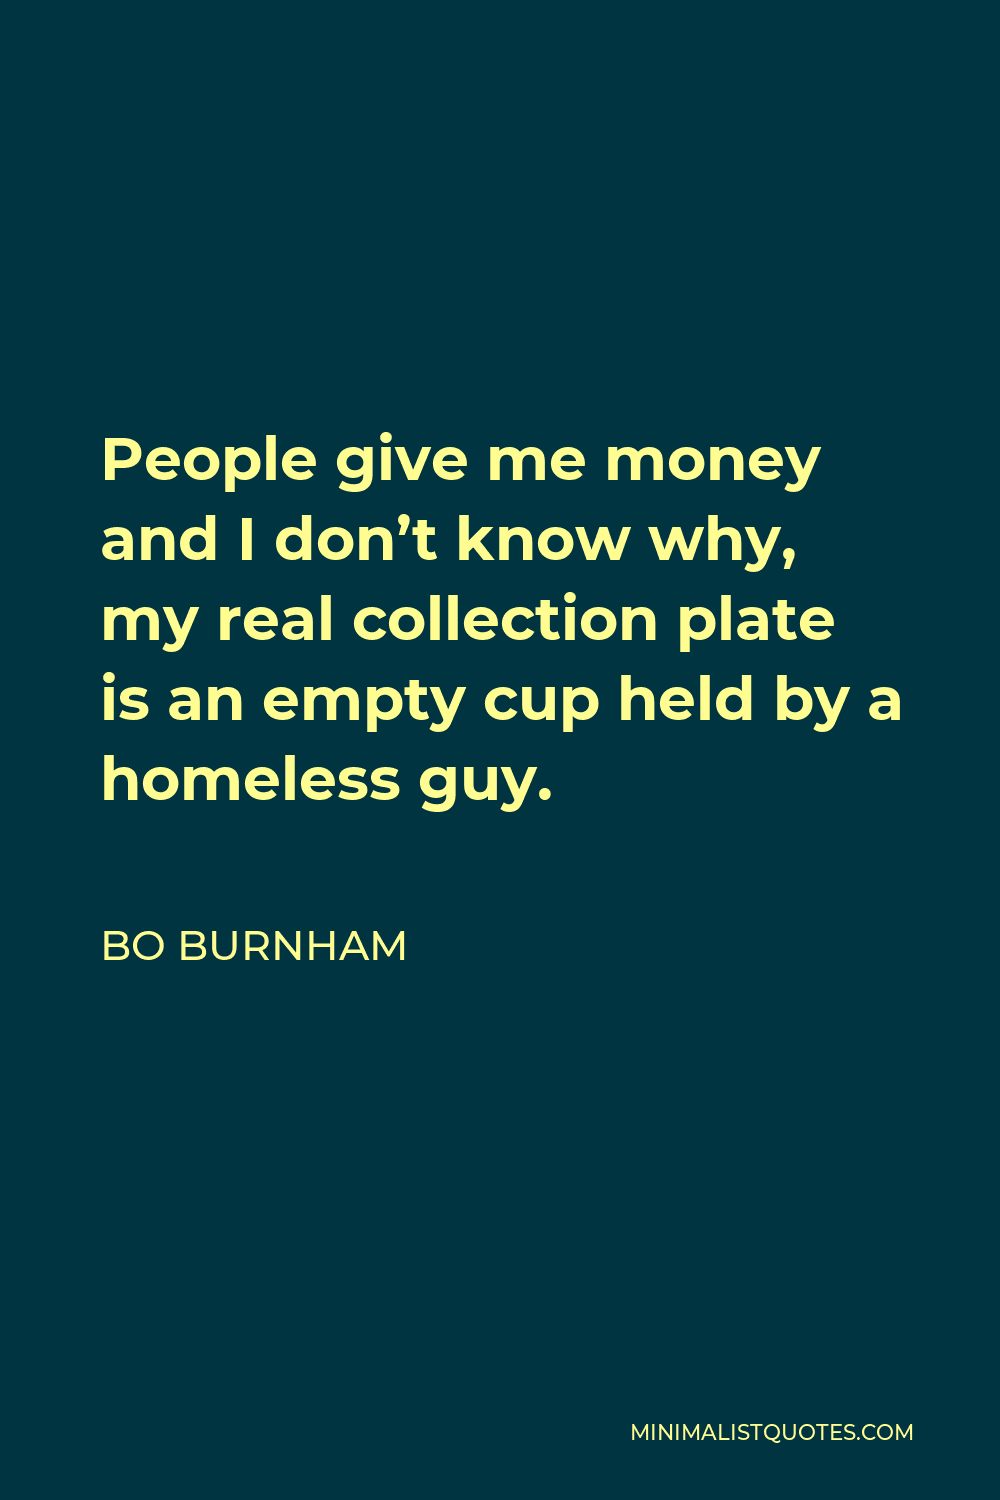 Bo Burnham Quote - People give me money and I don’t know why, my real collection plate is an empty cup held by a homeless guy.